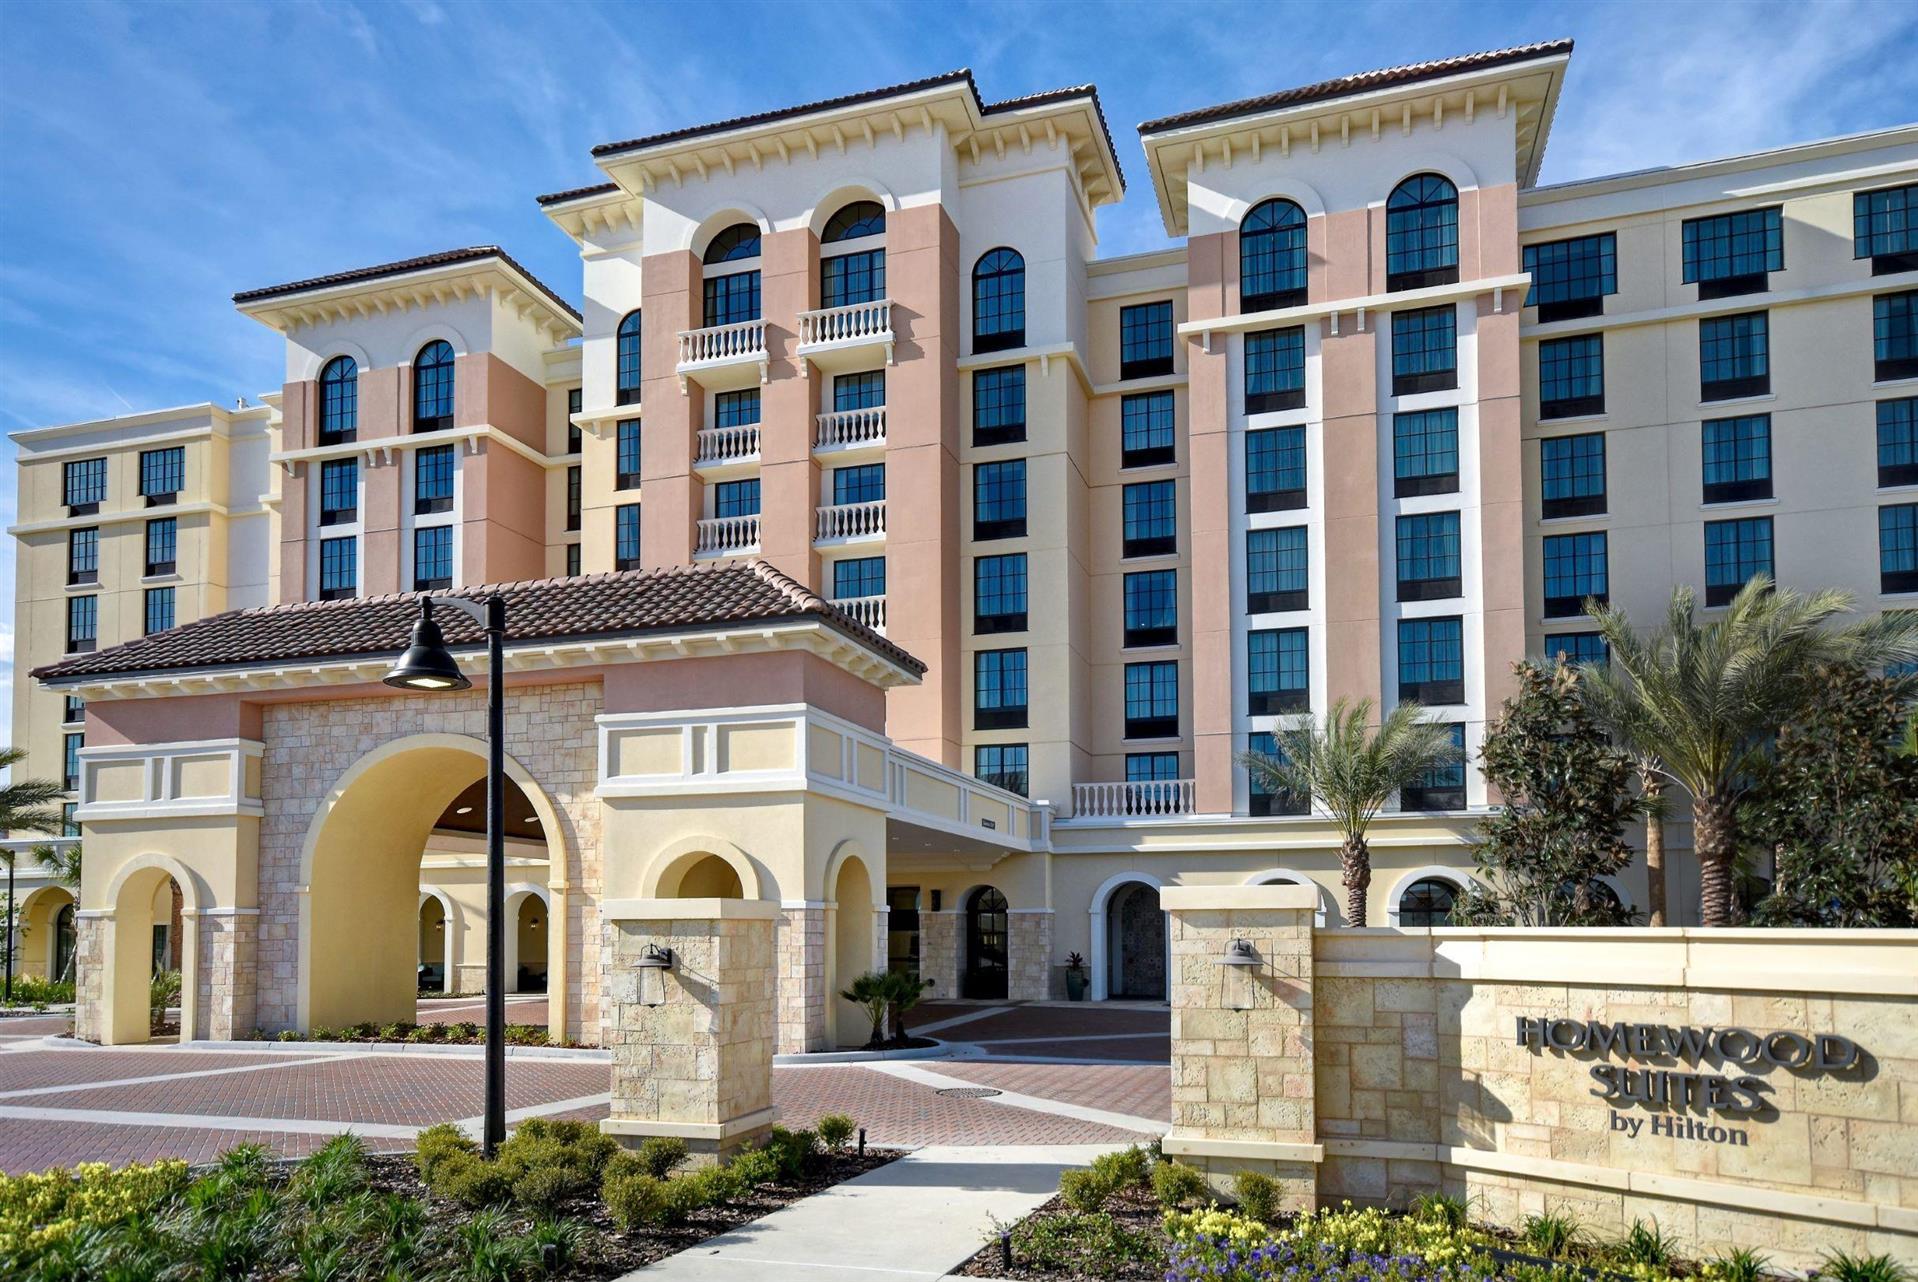 Homewood Suites by Hilton Orlando at FLAMINGO CROSSINGS Town Center in Winter Garden, FL